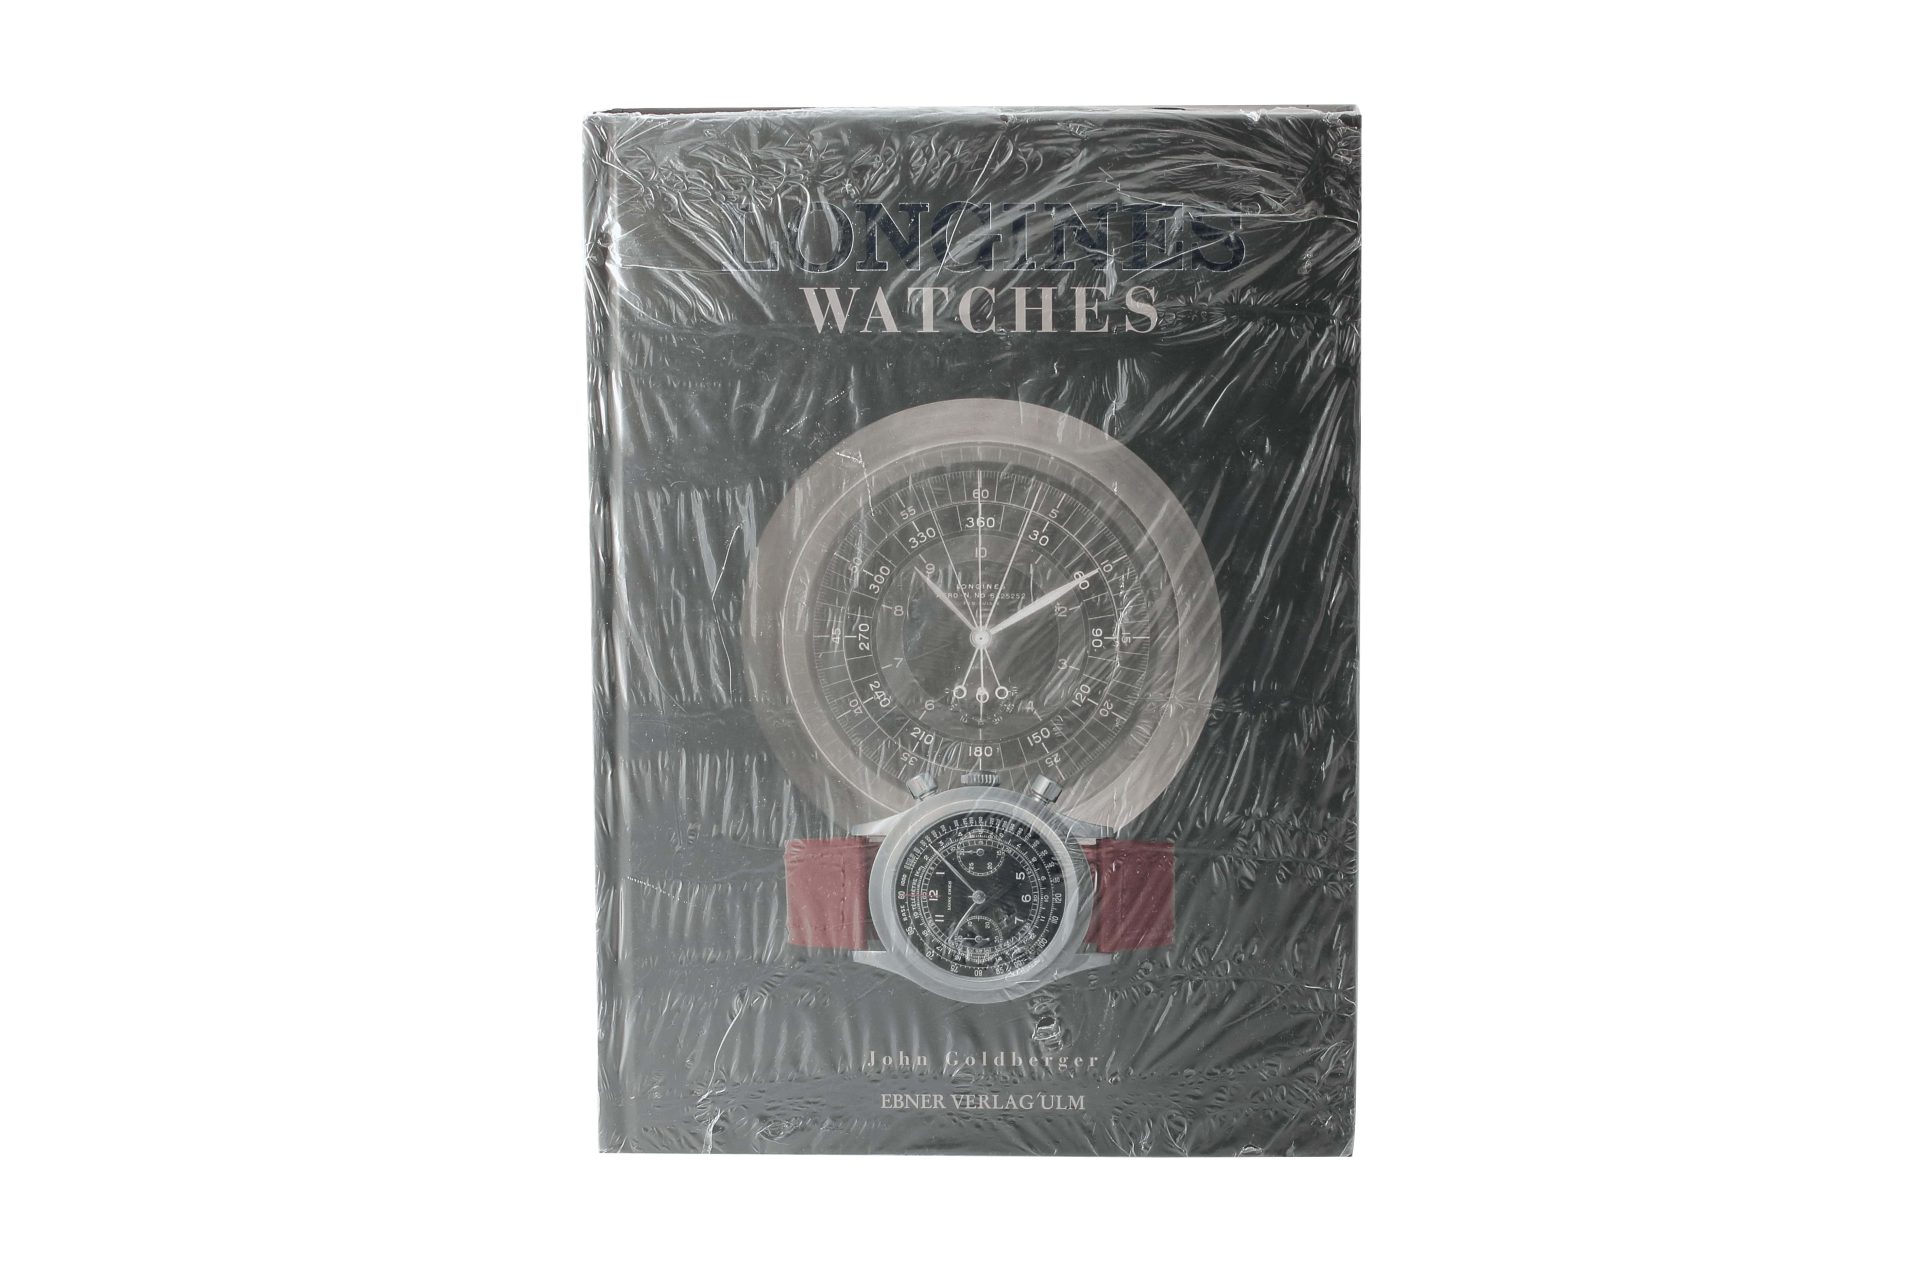 Longines Watches Book by John Goldberger - Rare Watch Parts